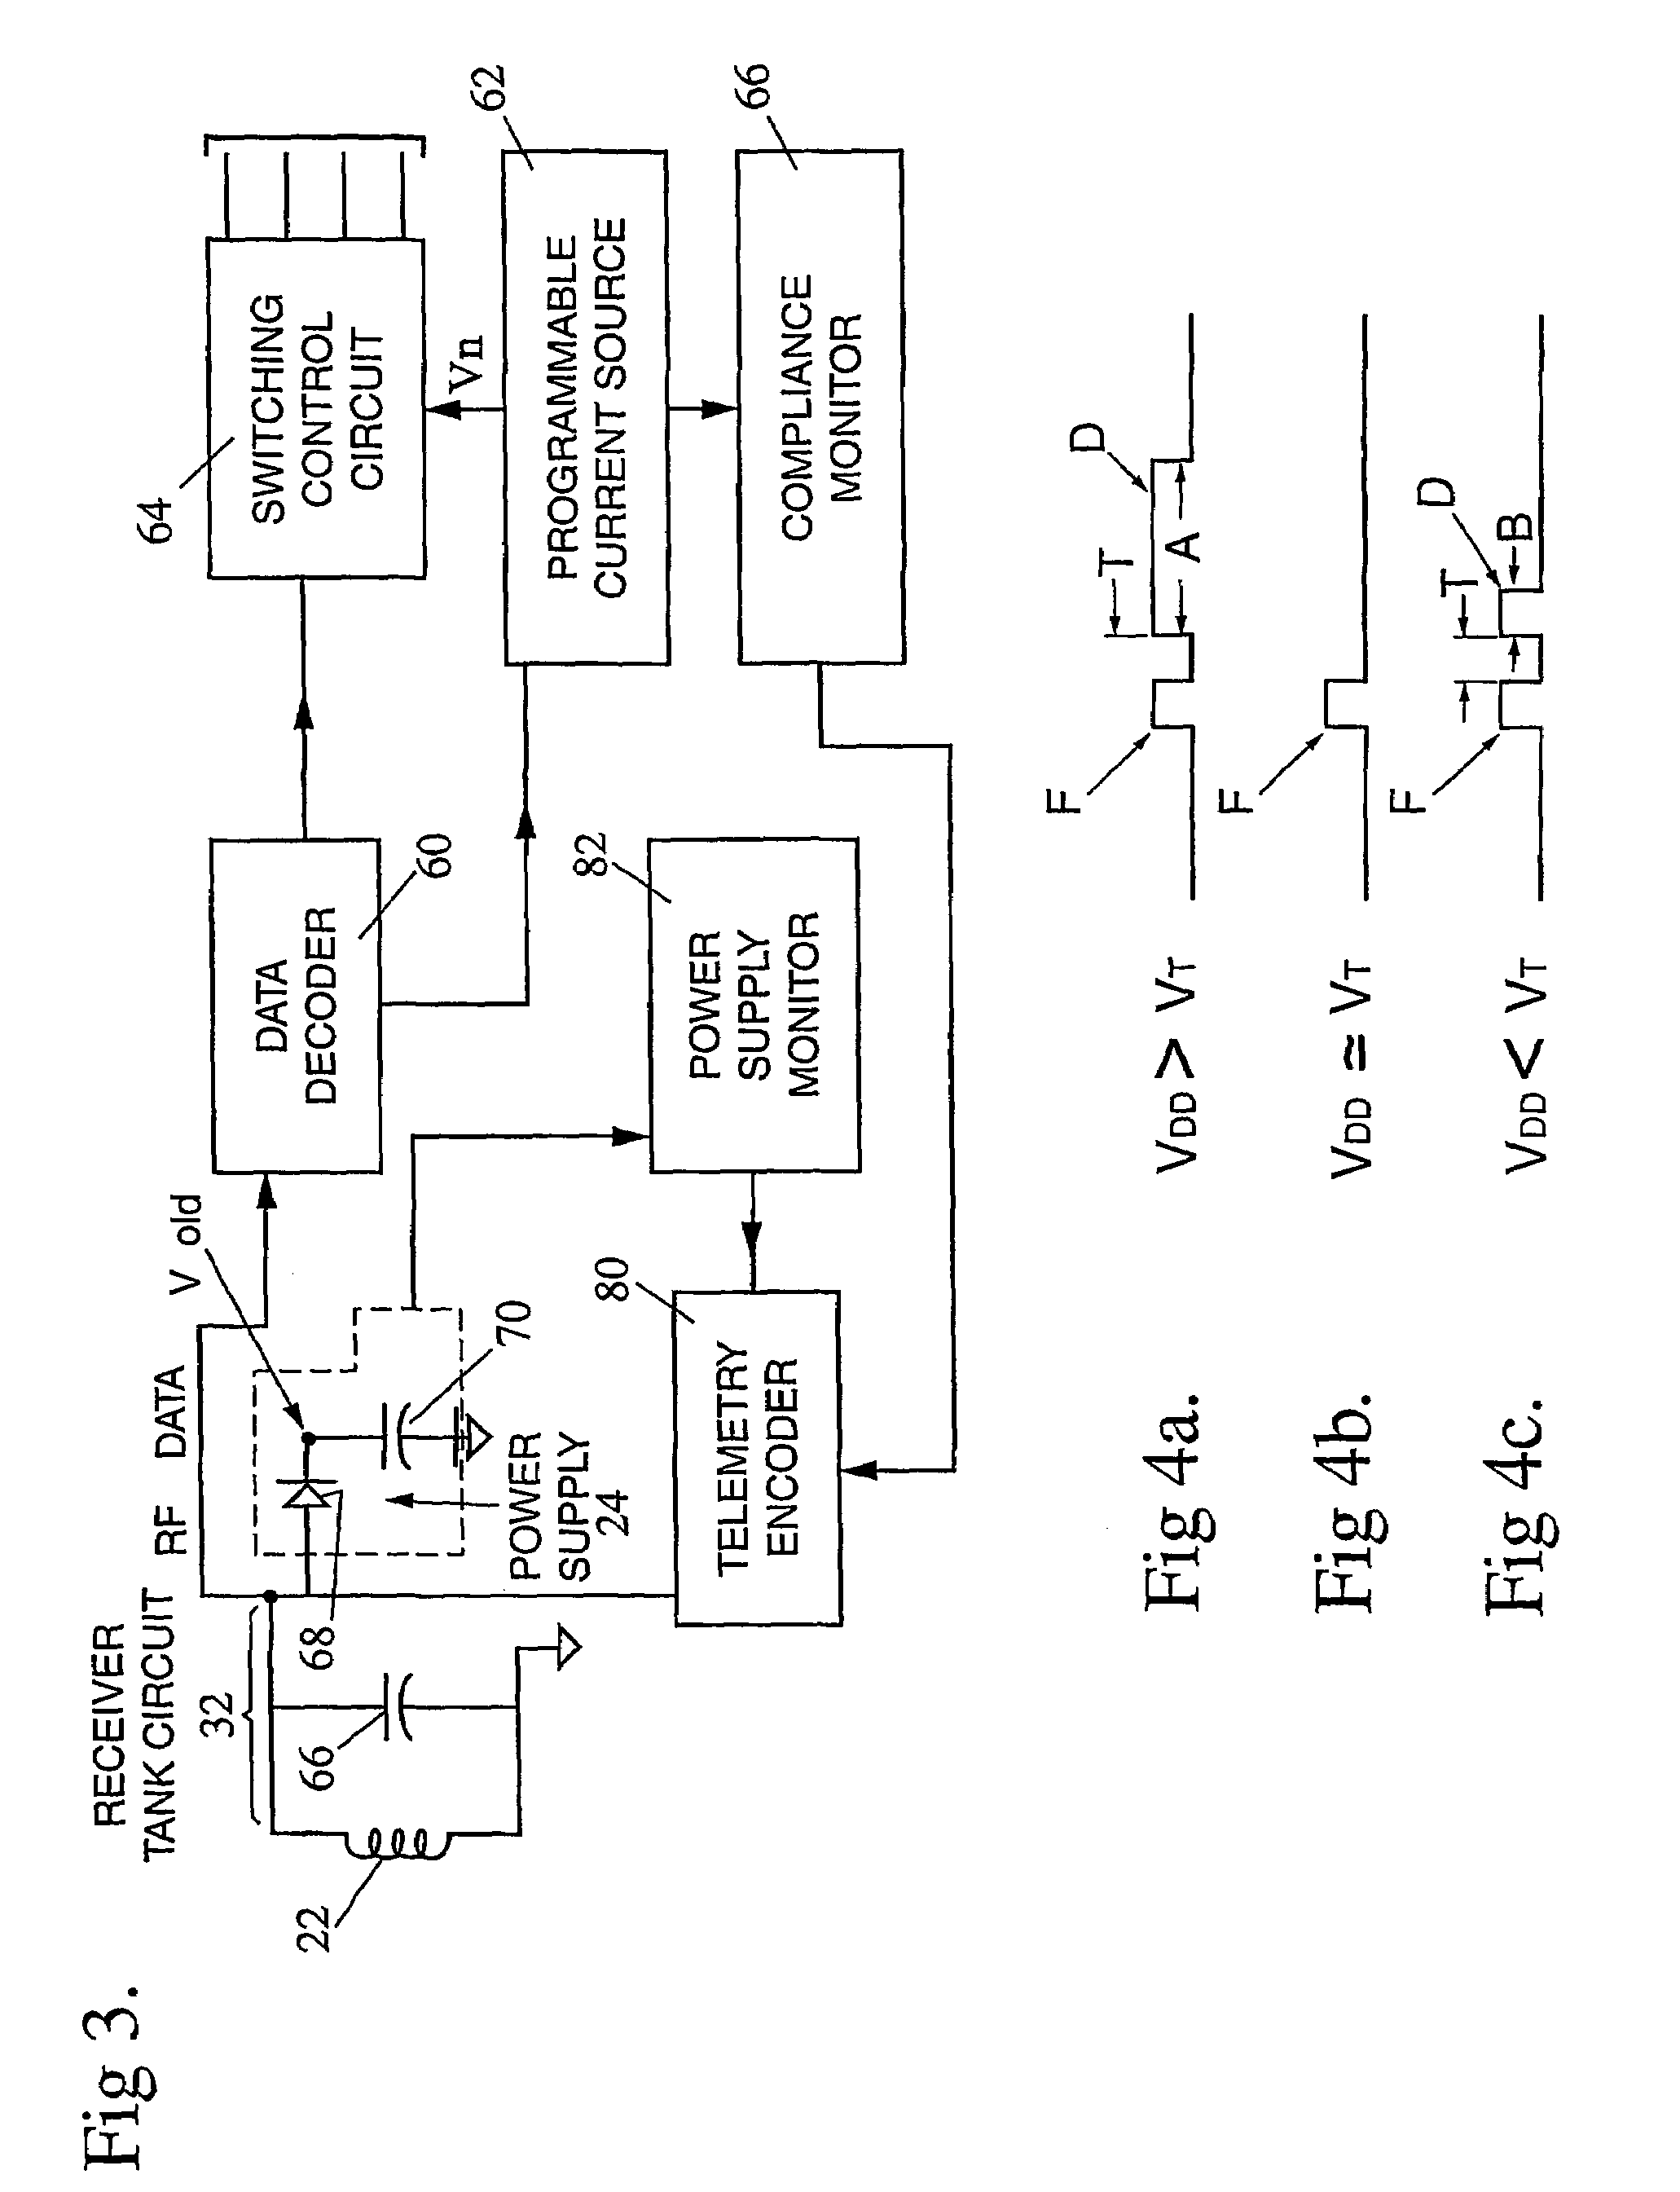 Transcutaneous power optimization circuit for a medical implant